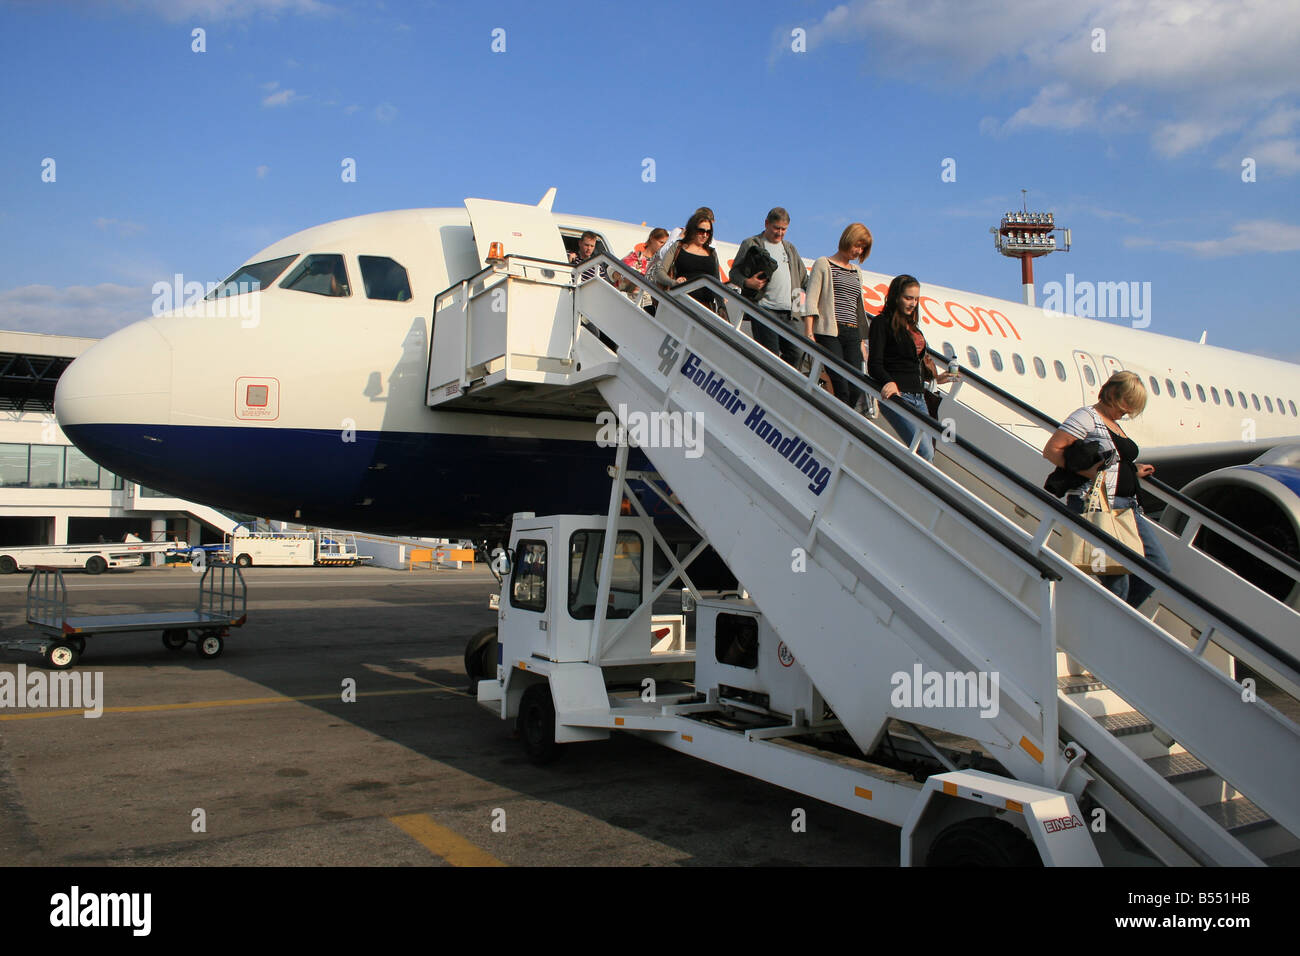 AIRCRAFT PASSENGERS. DEPLANING FROM AIRCRAFT. EASYJET A320 AIRBUS Stock Photo